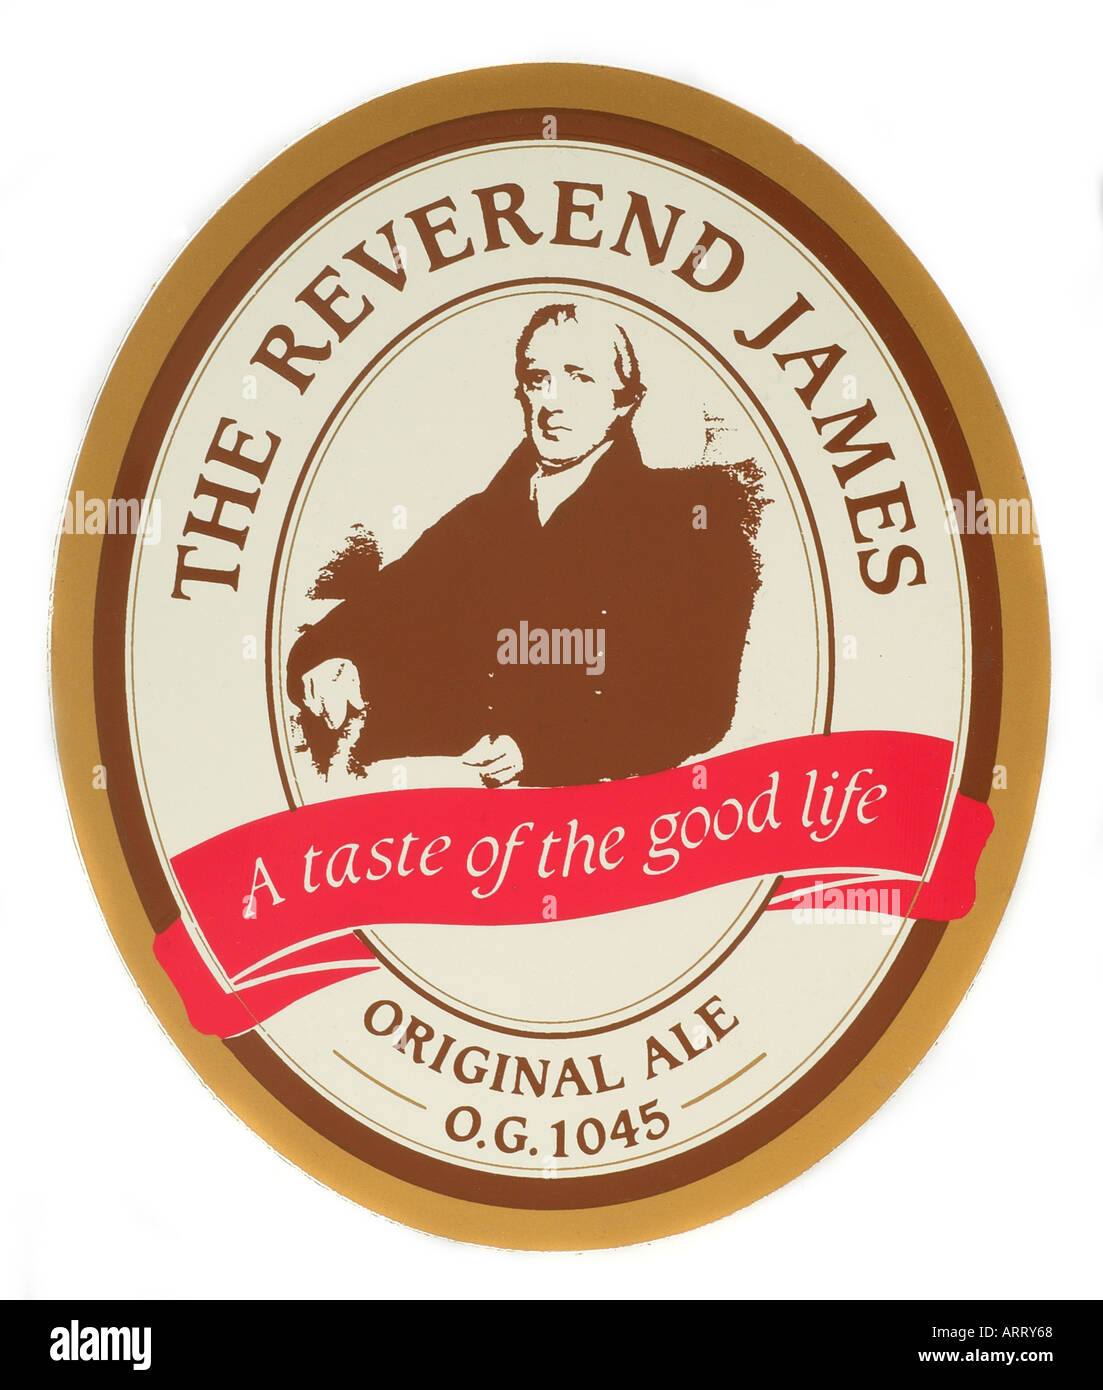 Beer pump label England UK United Kingdom GB Great Britain the reverand james a taste of the good ale original Stock Photo